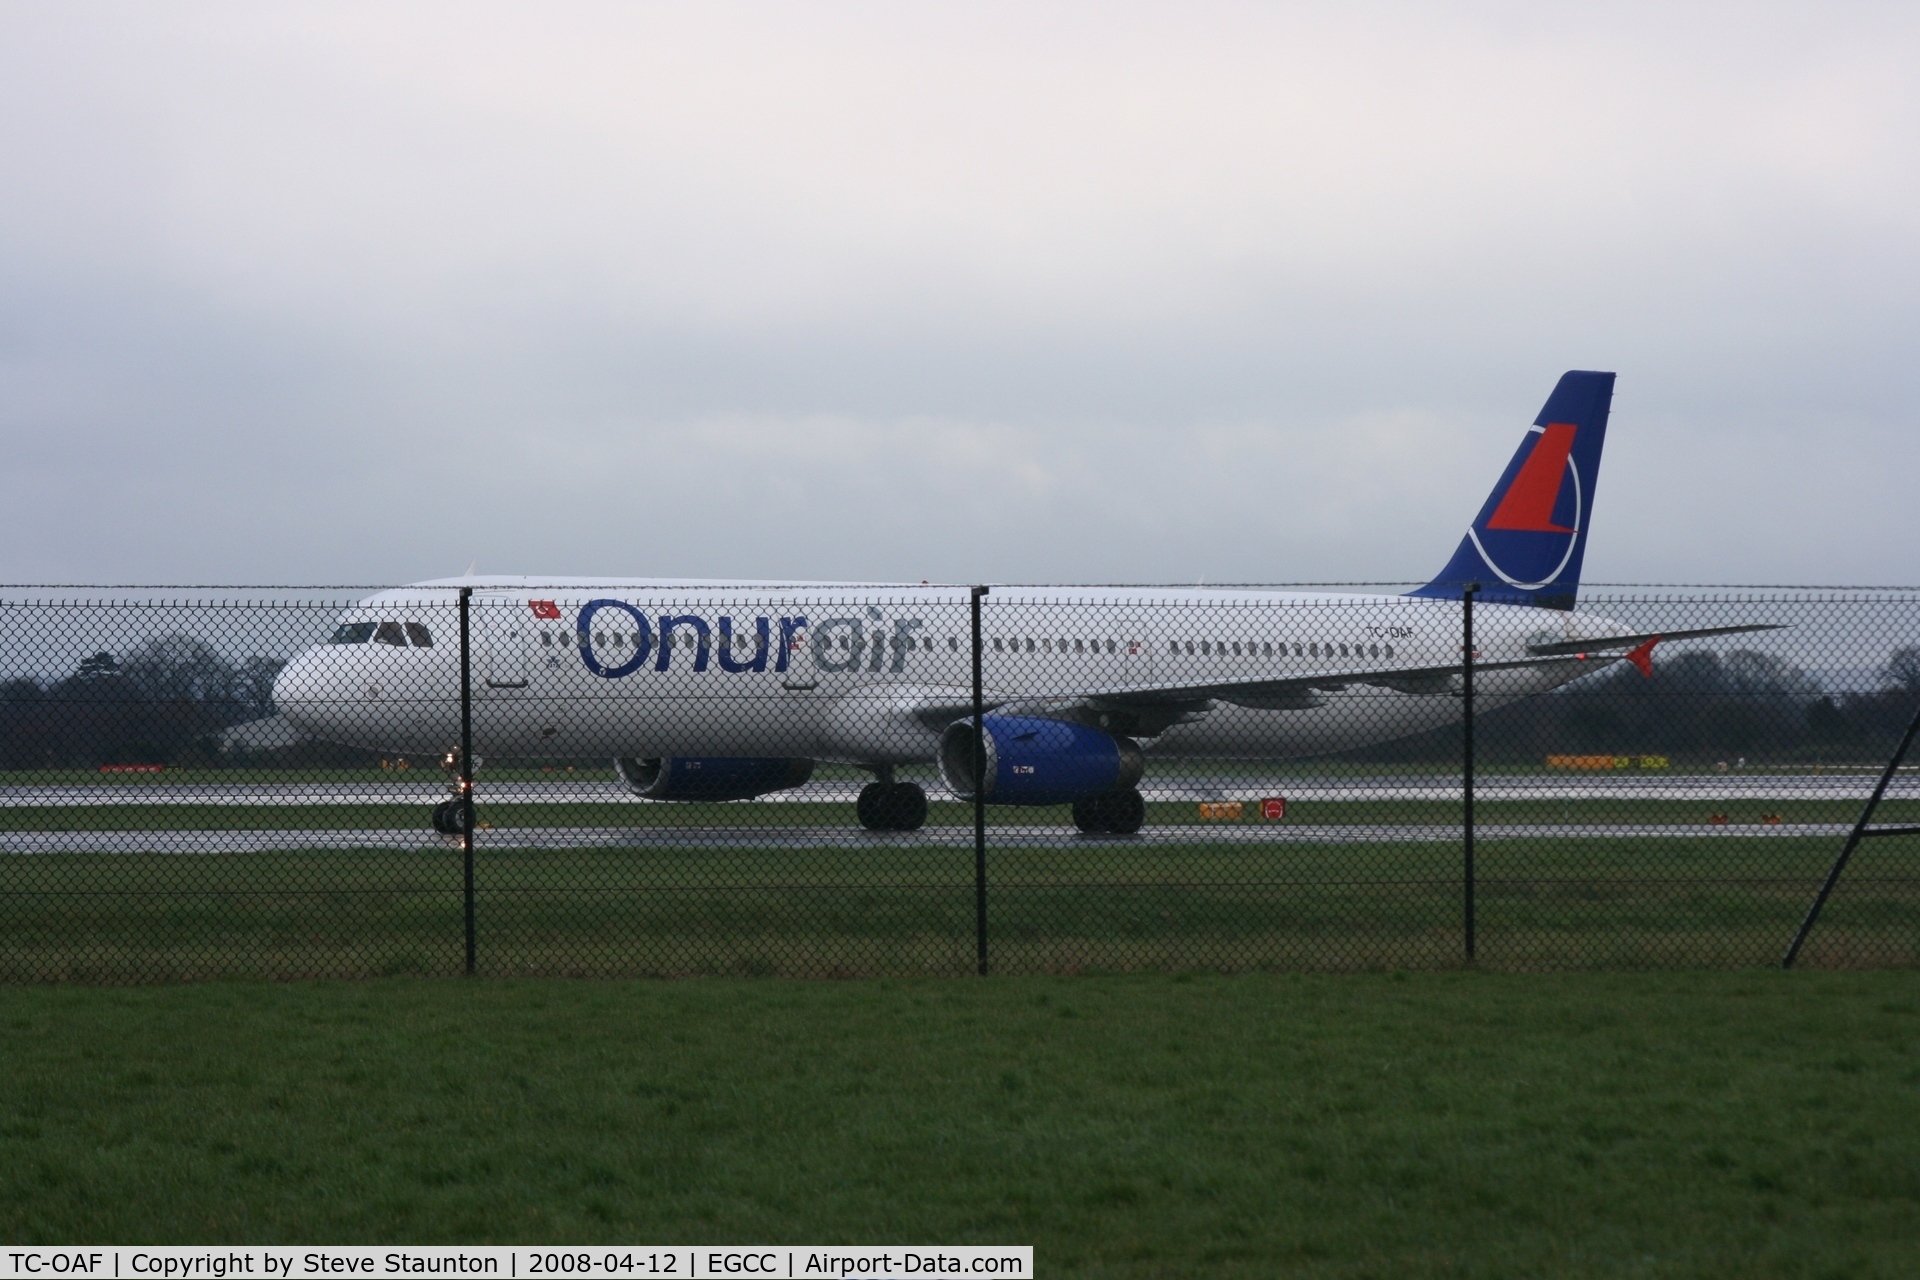 TC-OAF, 1997 Airbus A321-231 C/N 668, Taken at Manchester Airport on a typical showery April day